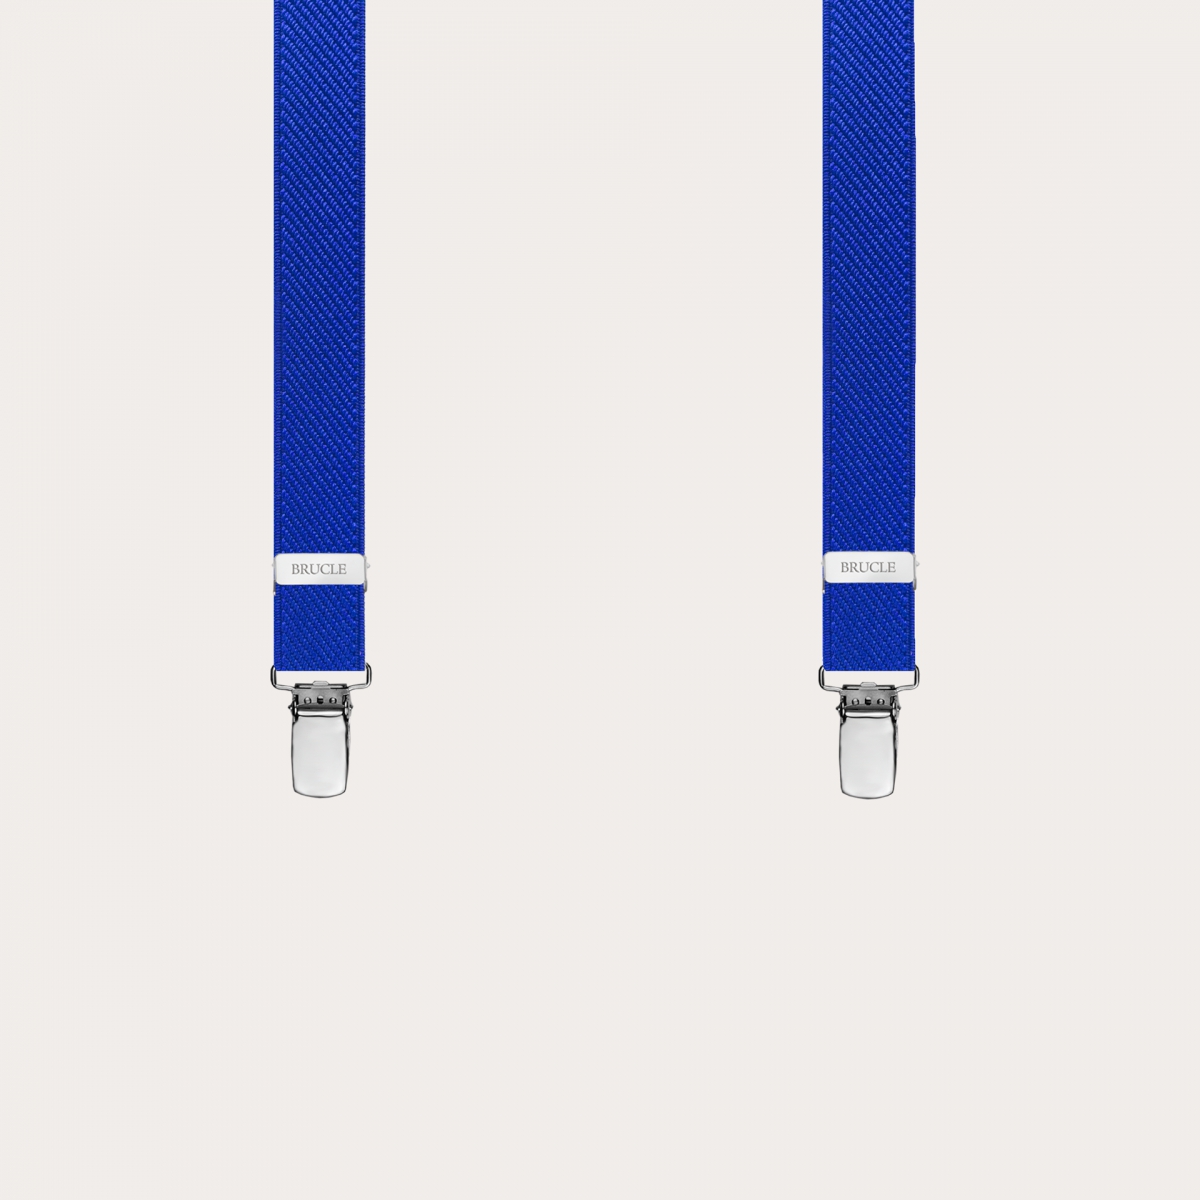 Thin Y suspenders for men and women, blue royal